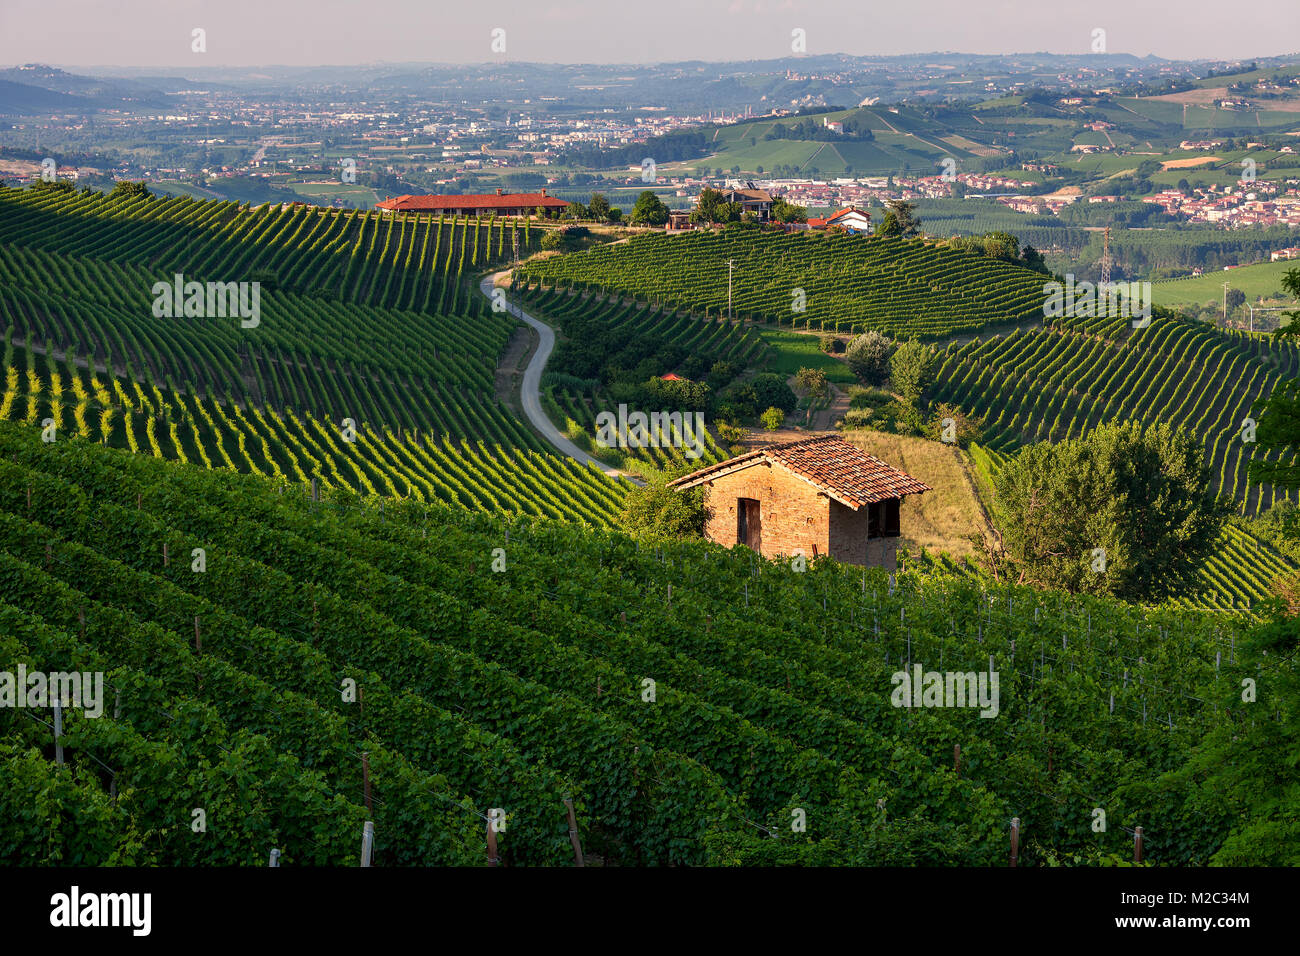 Small rural house among green vineyards of Barolo in Piedmont, Northern Italy. Stock Photo